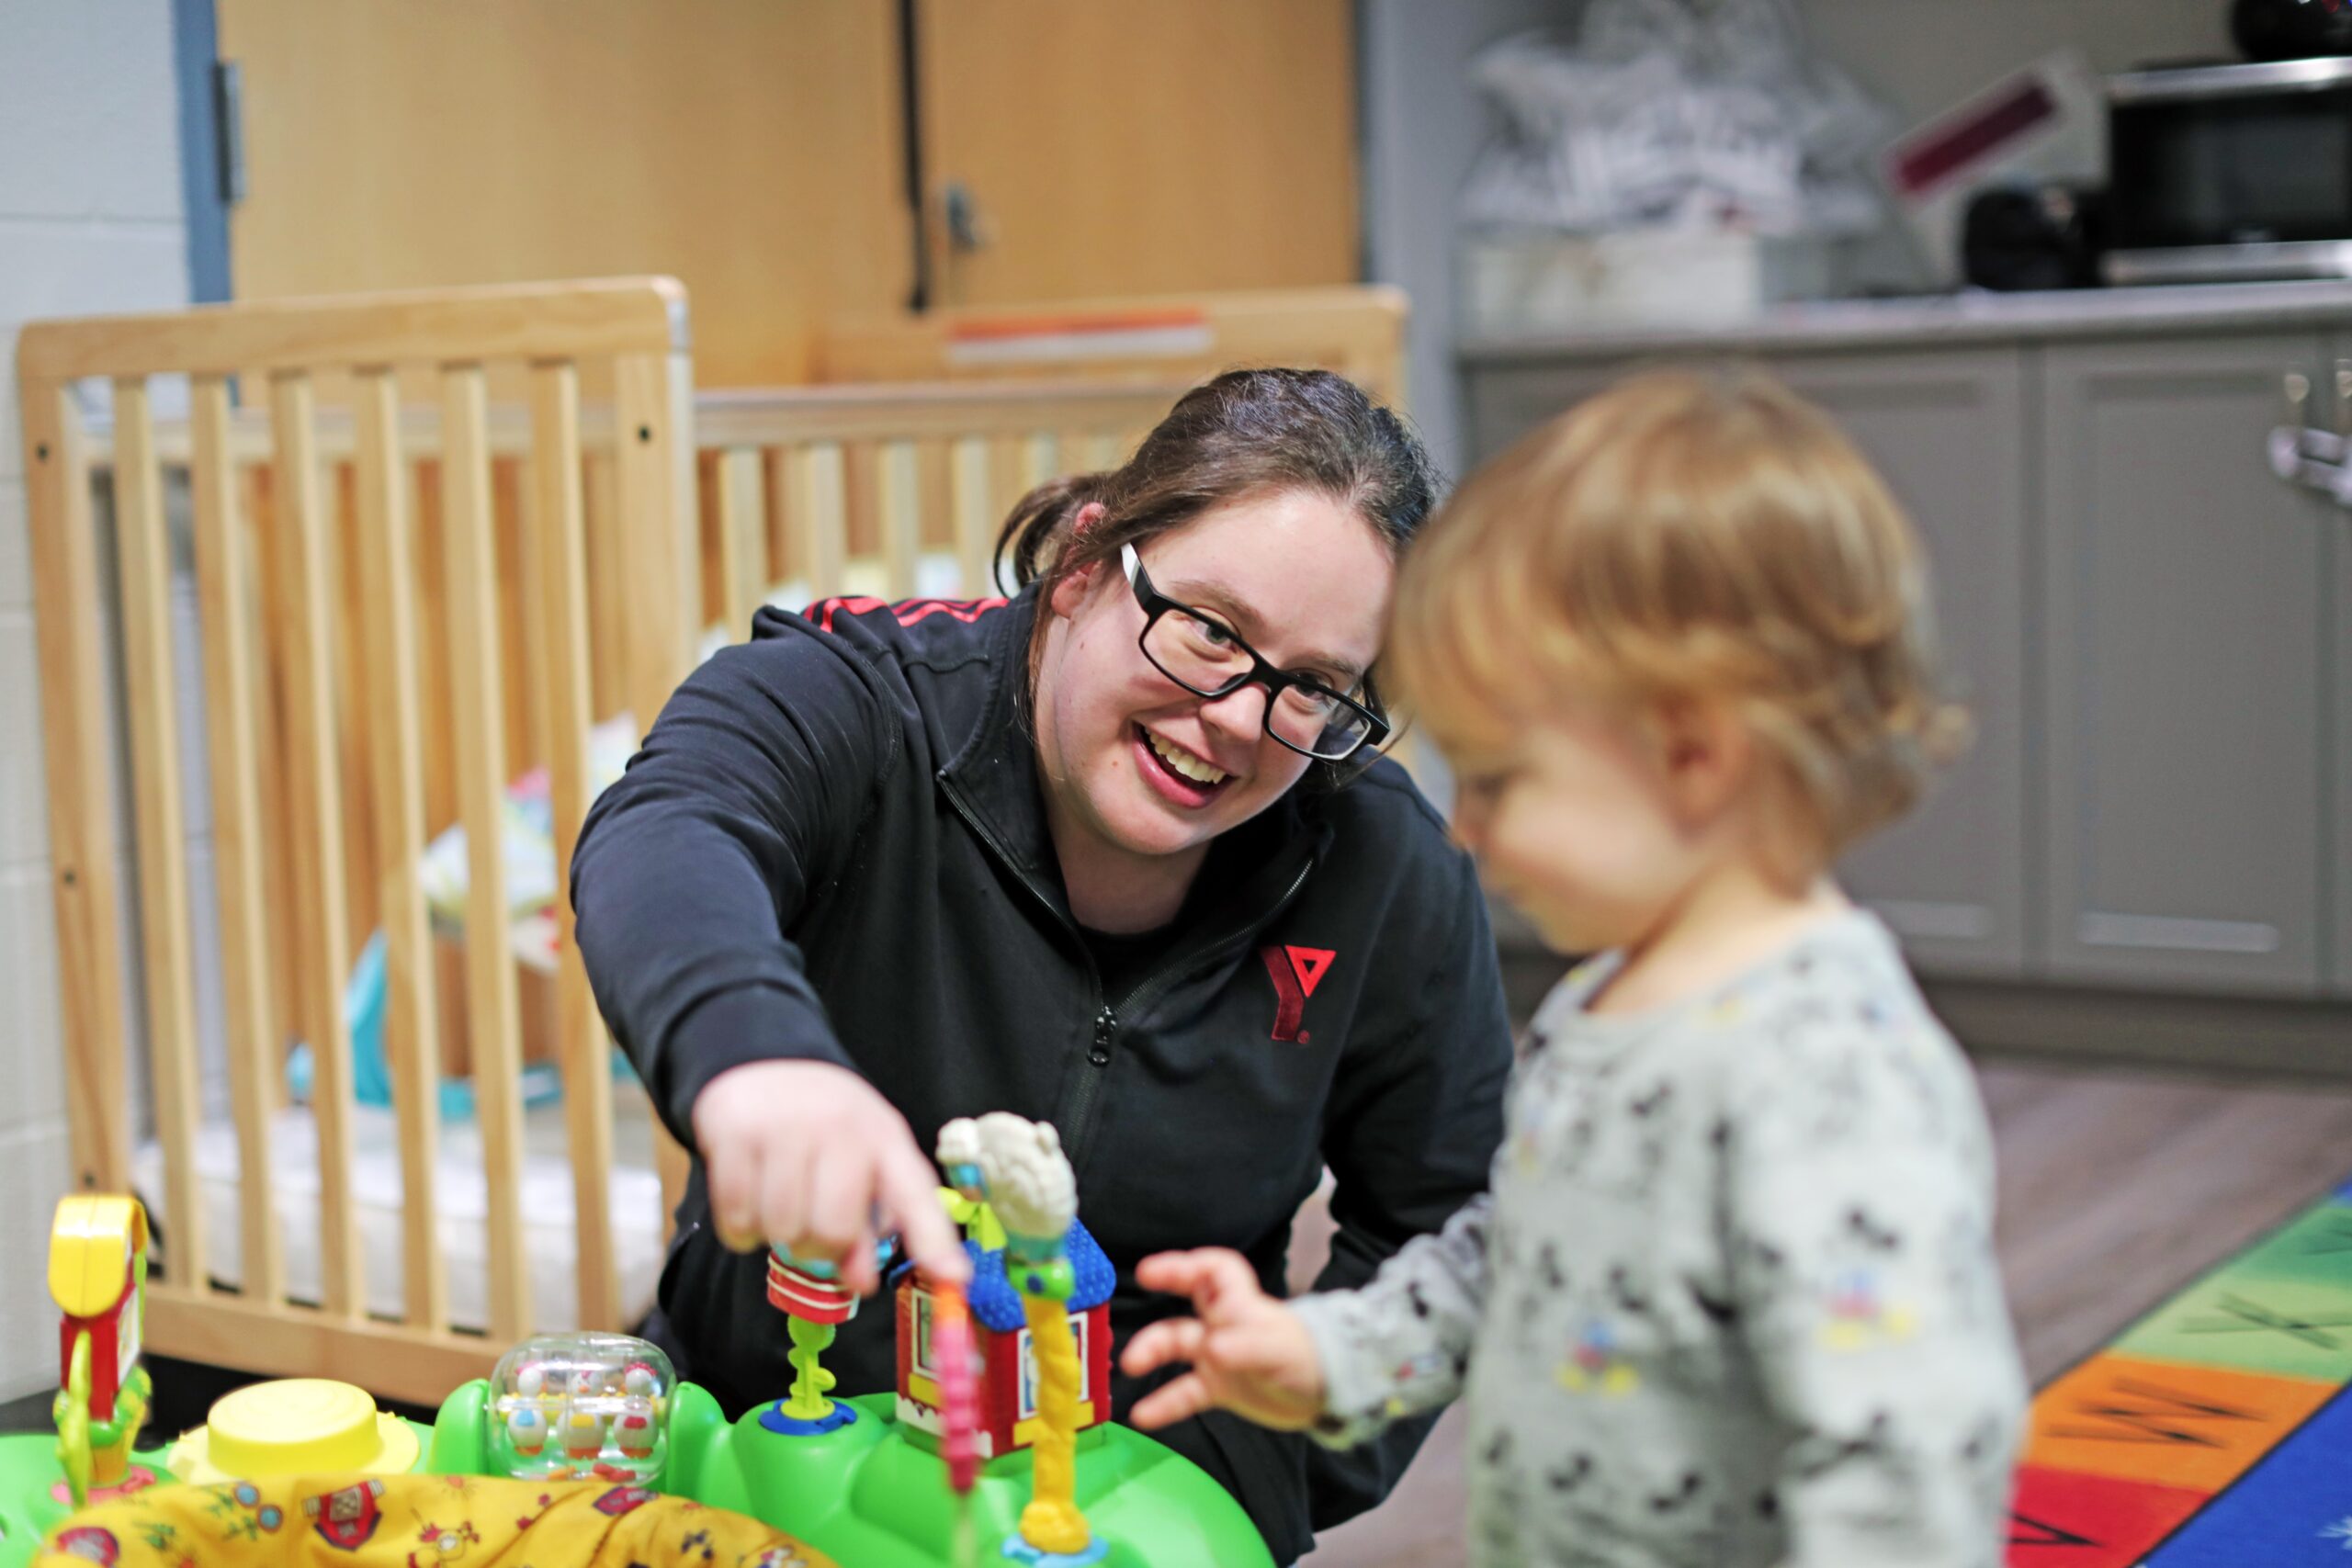 A YMCA employee smiling and playing with toys with a child